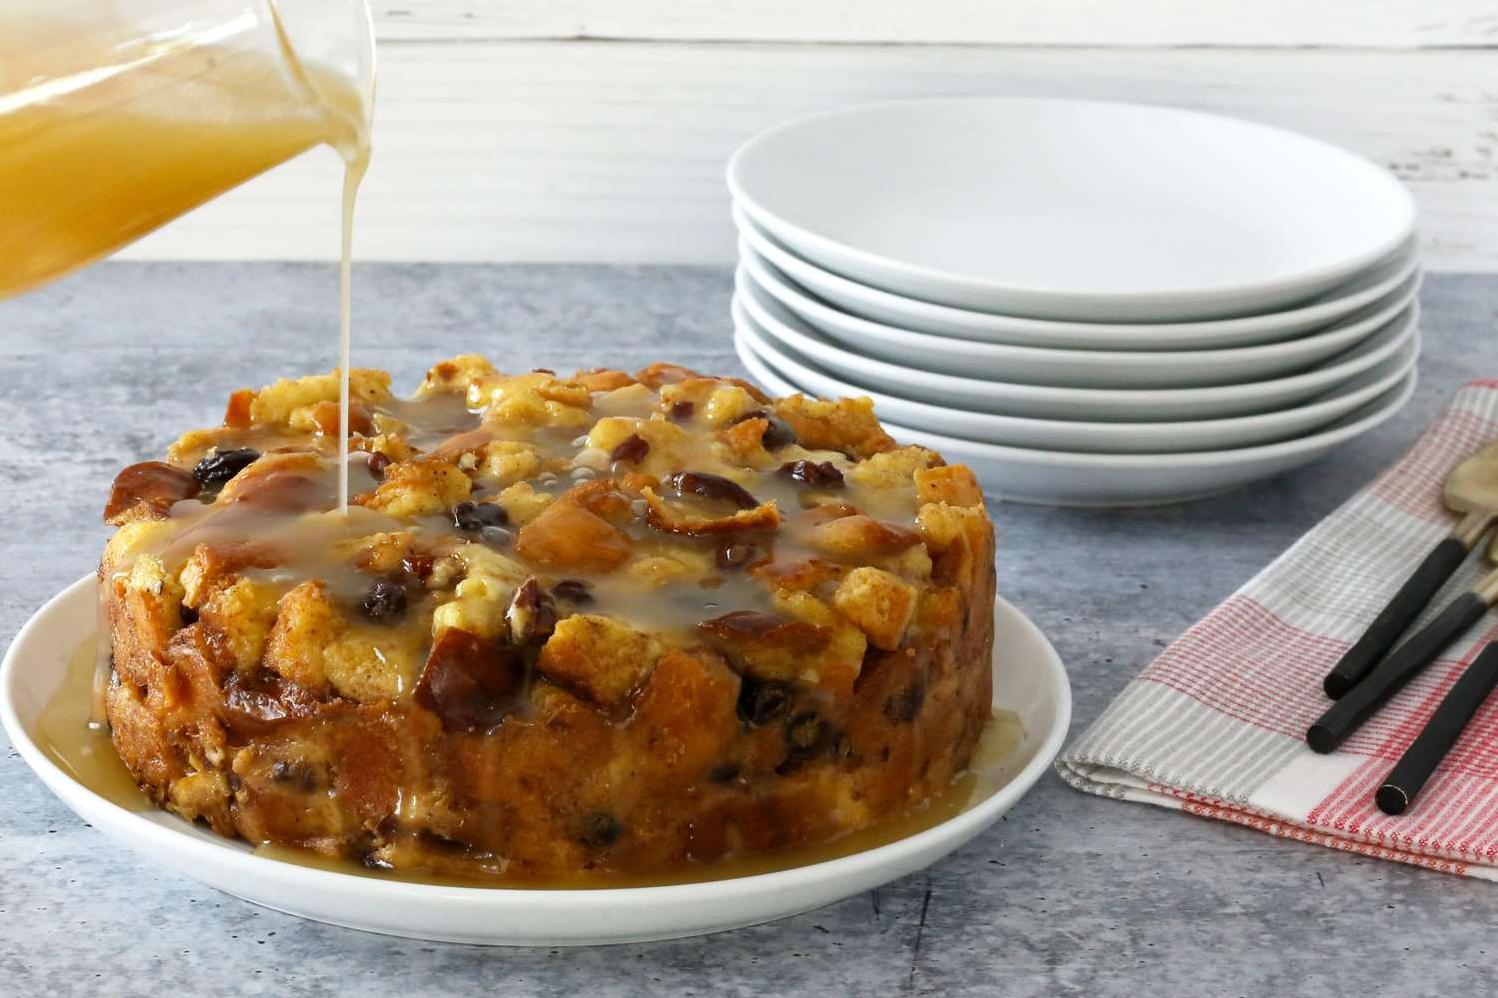  If you want to impress your guests, serve them this delicious Instant Pot bread pudding.